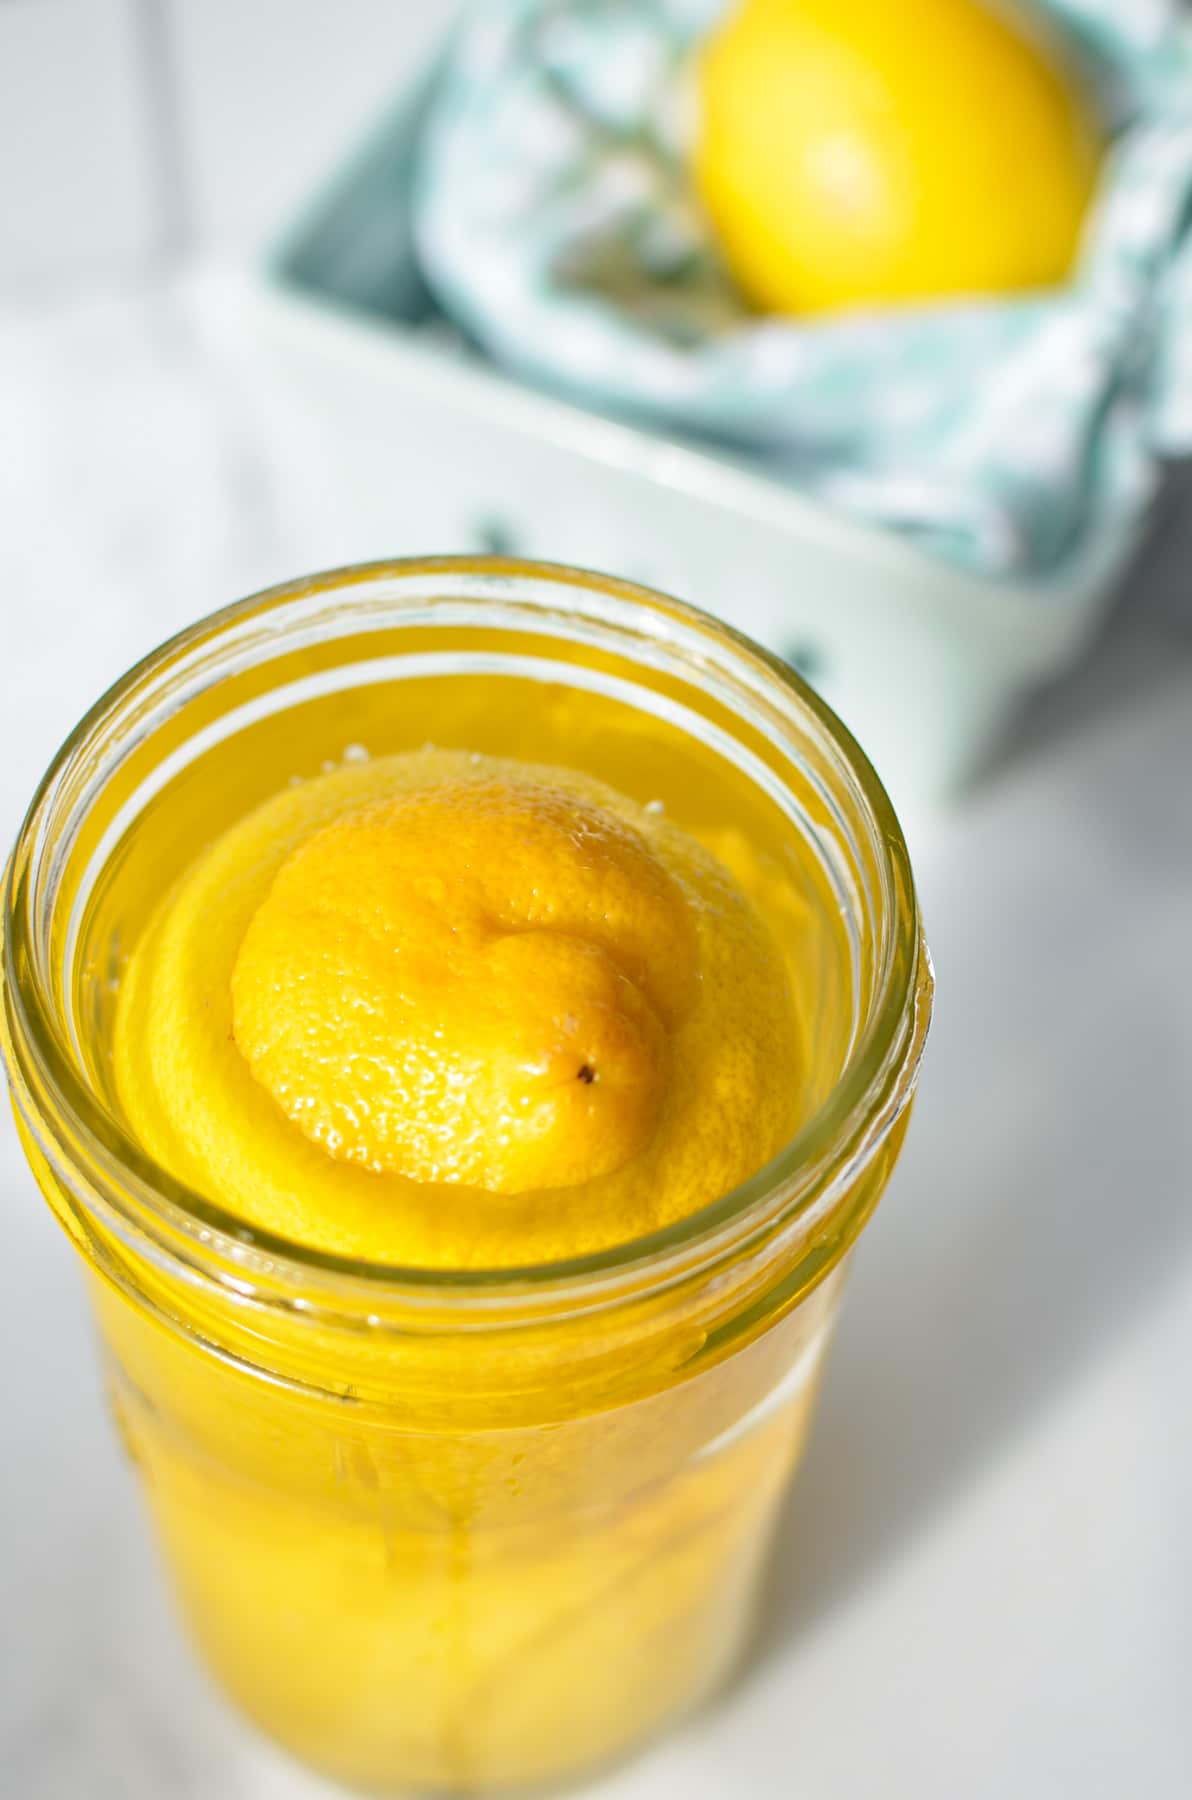 A jar of lemons, filled with water.